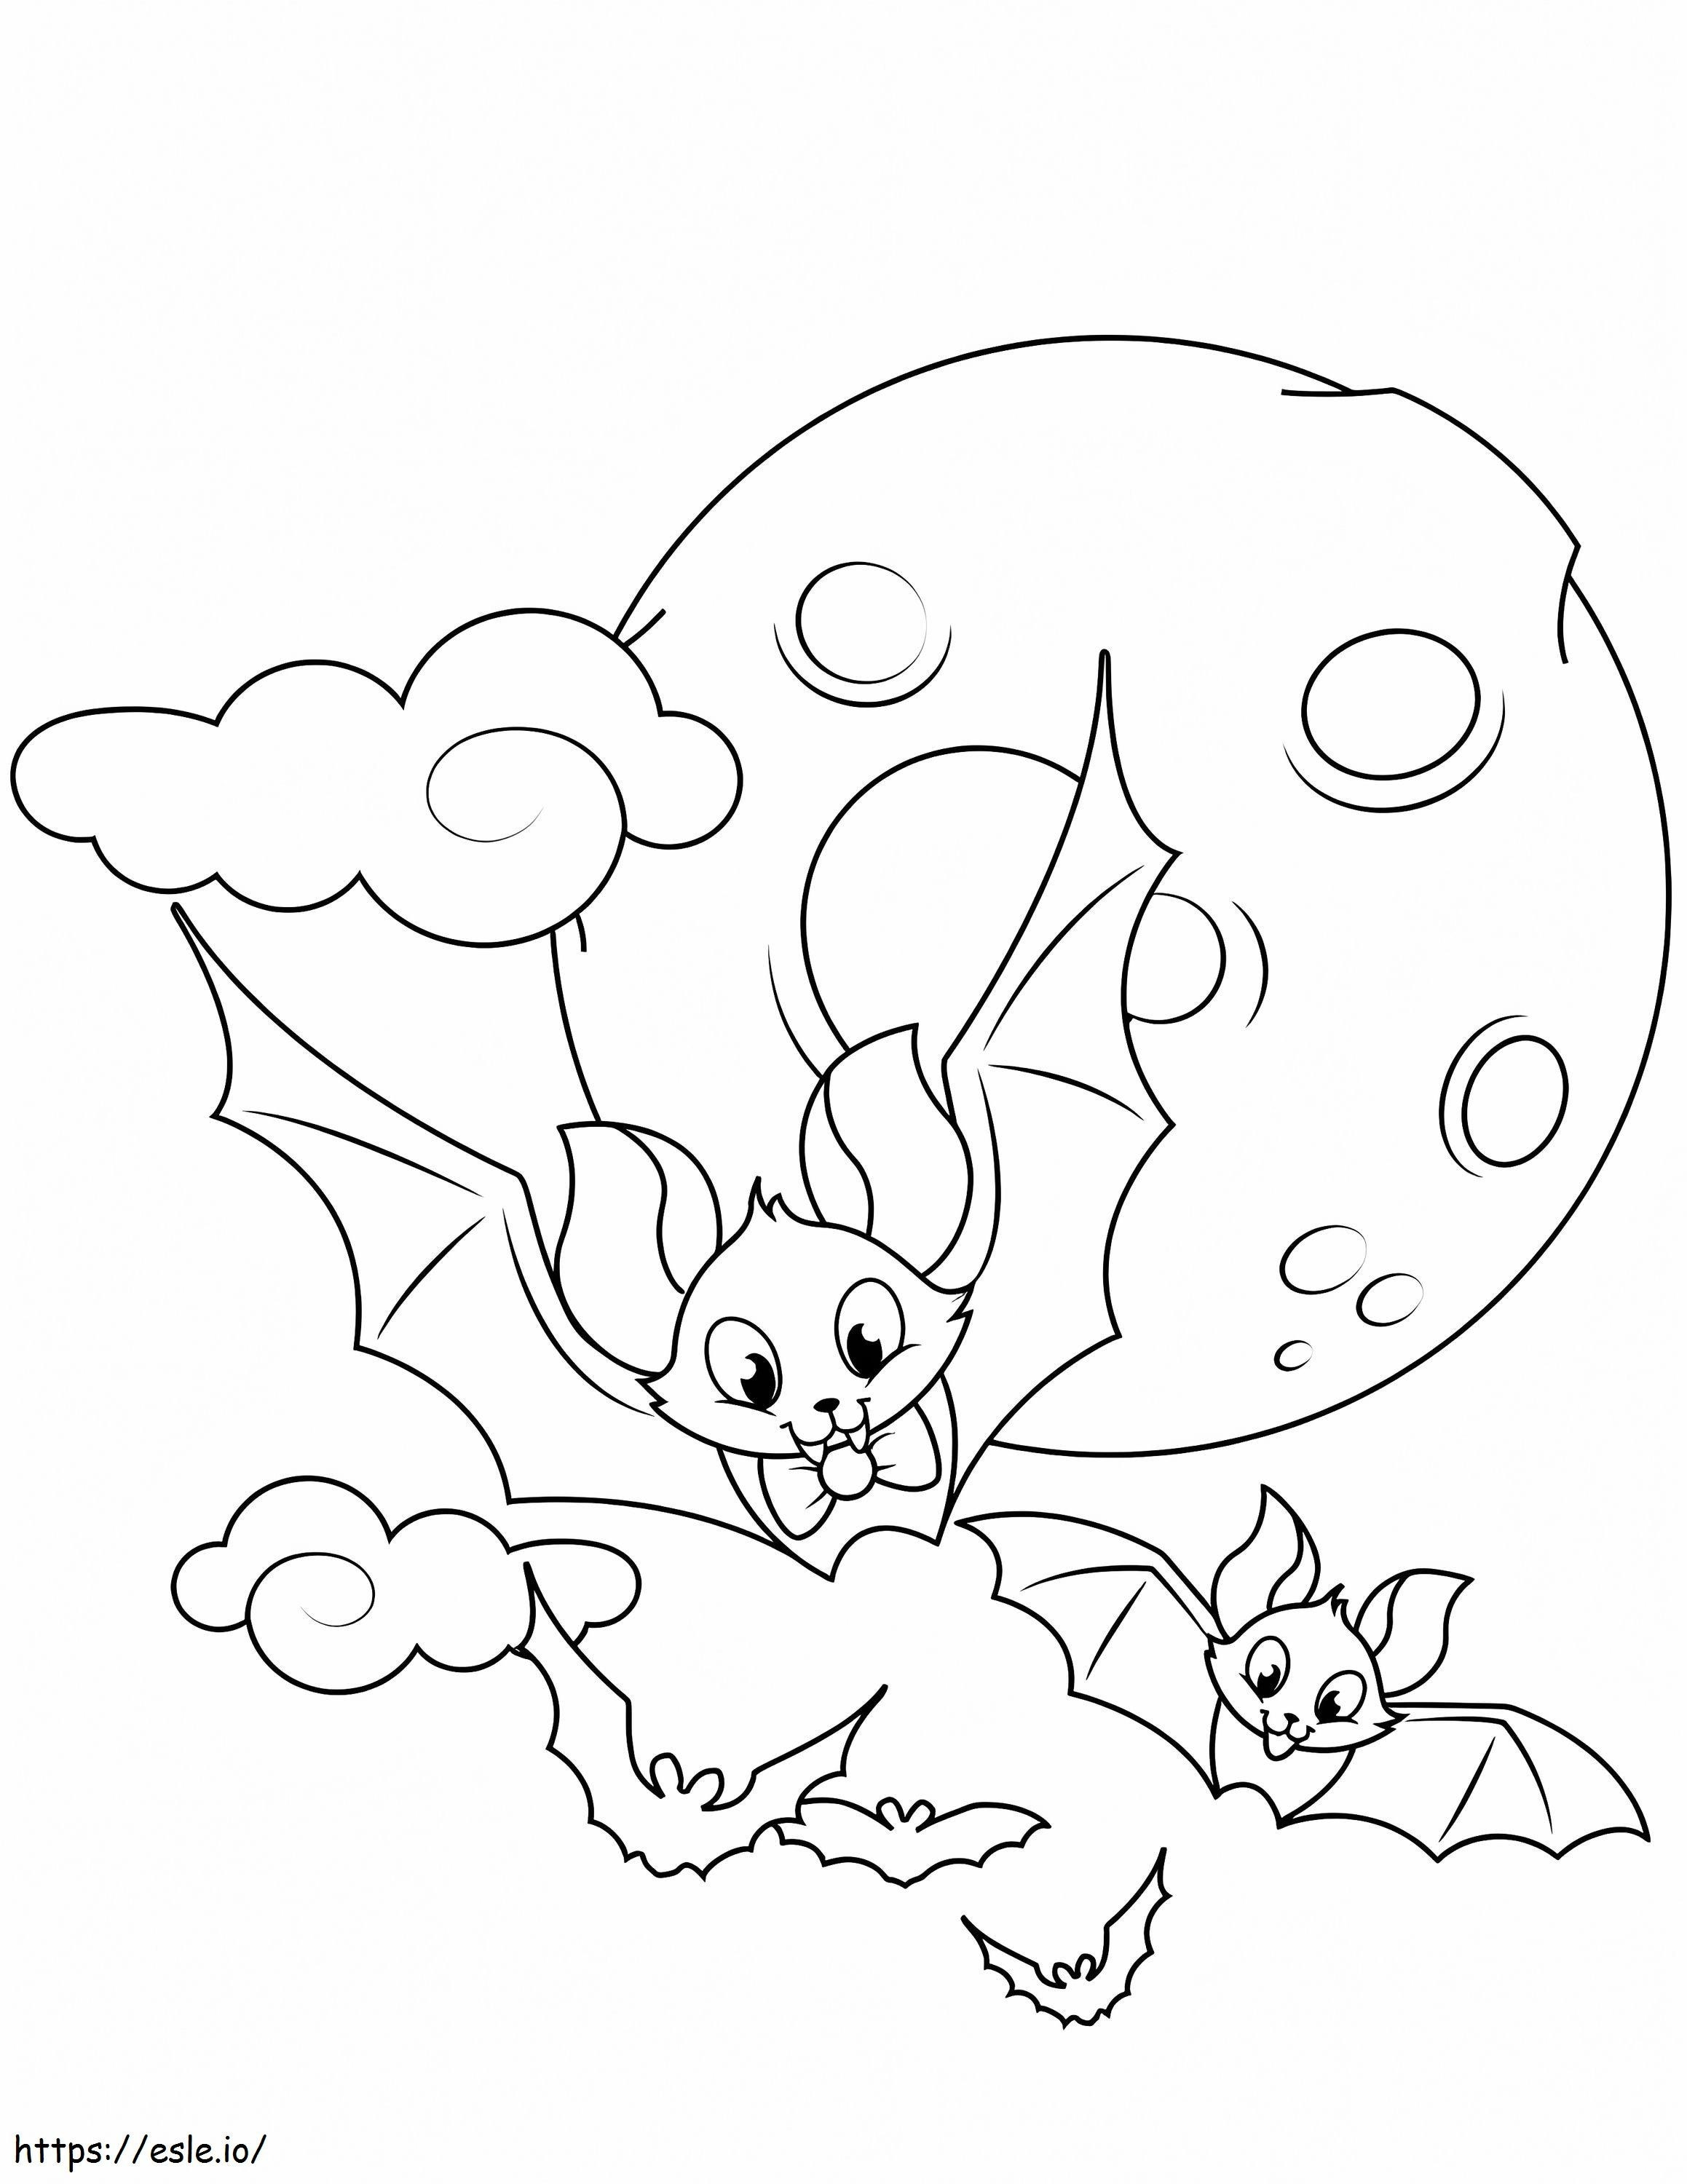 Cute Halloween Bats coloring page